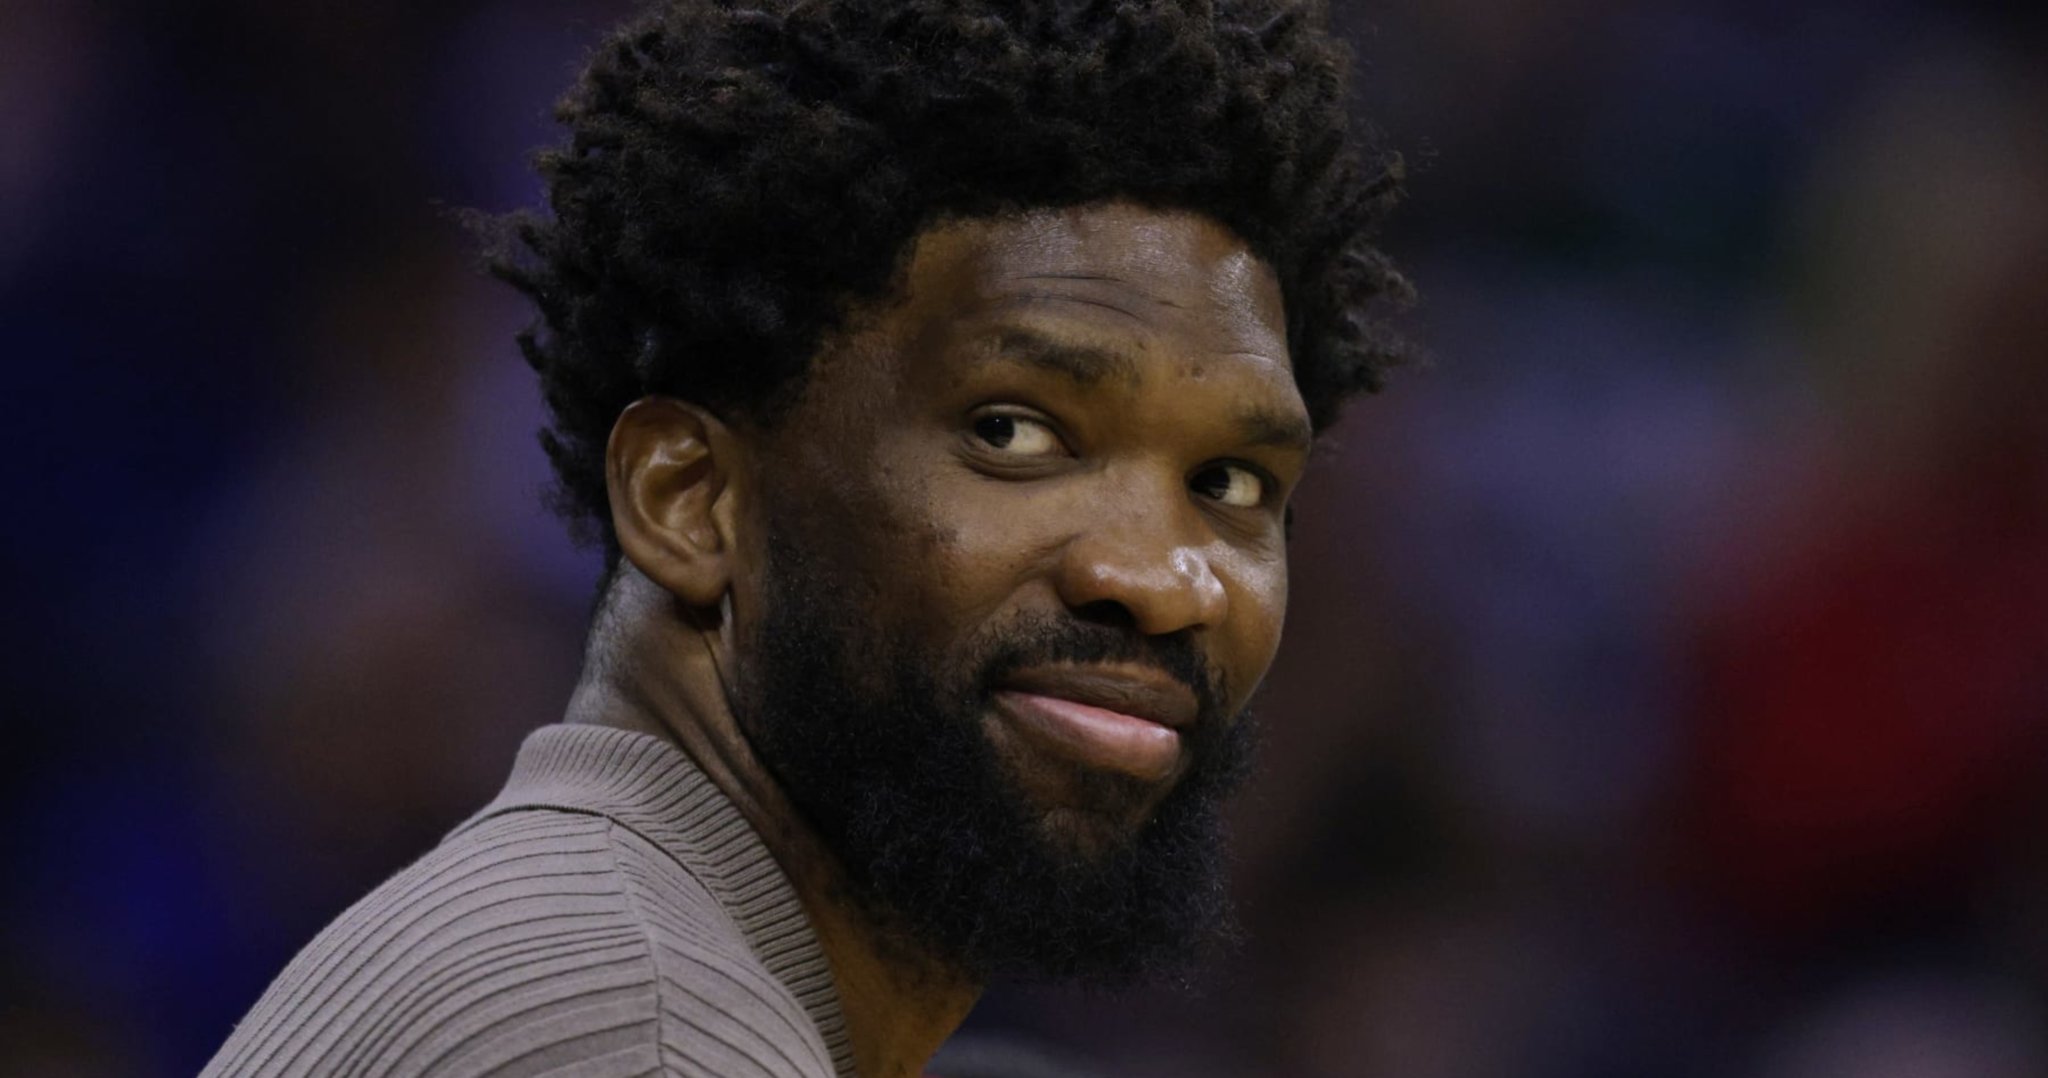 76ers' Nurse: Joel Embiid Has 'Very Good' Chance to Return from Knee Injury in April